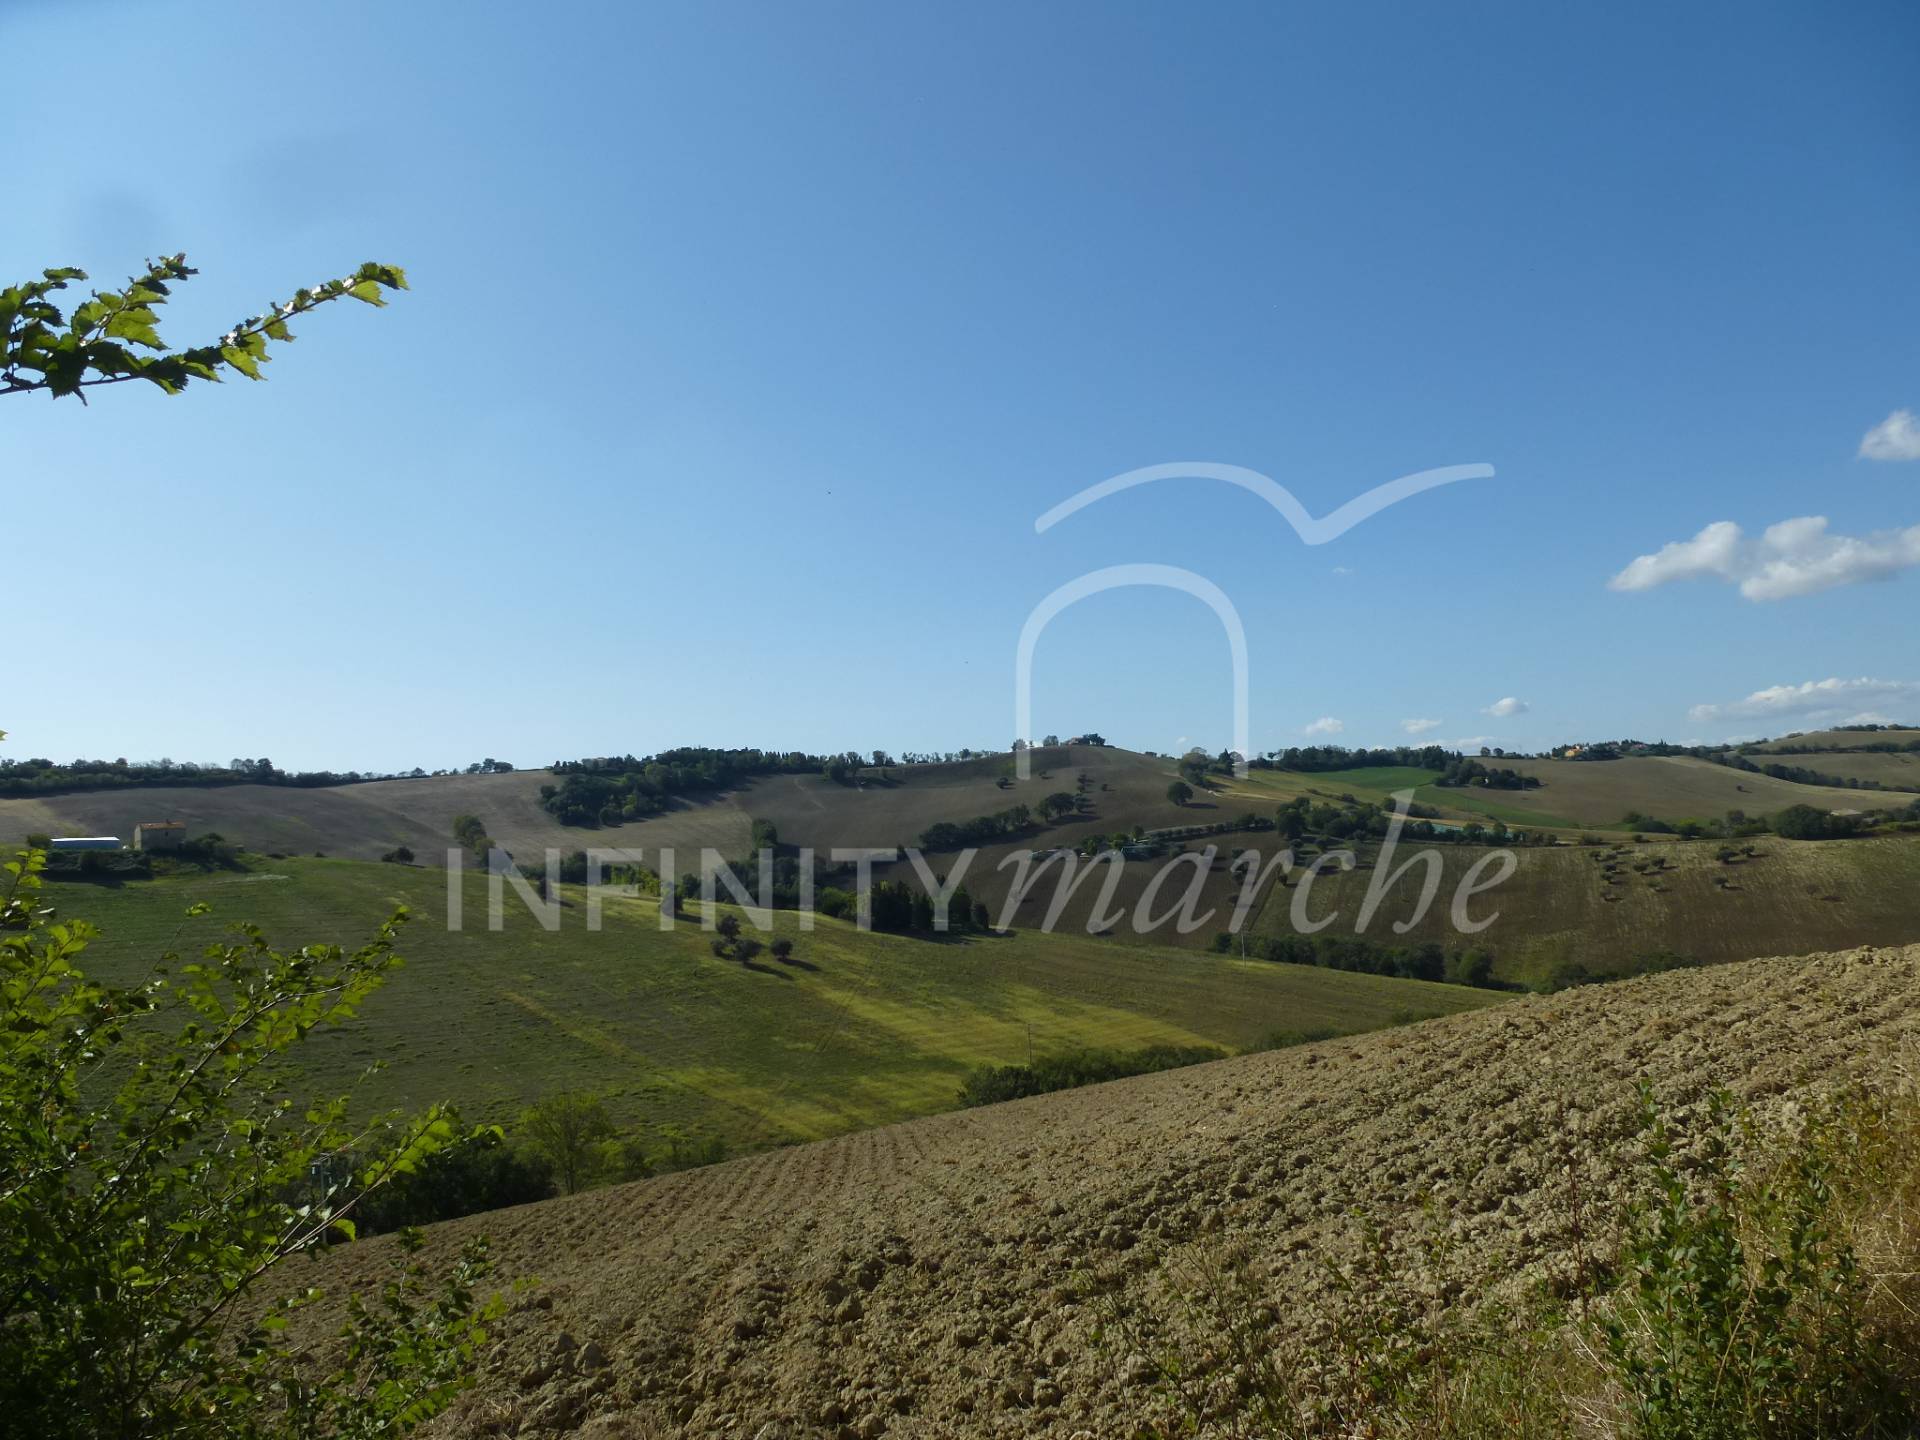 Country House in Montelupone (Macerata)